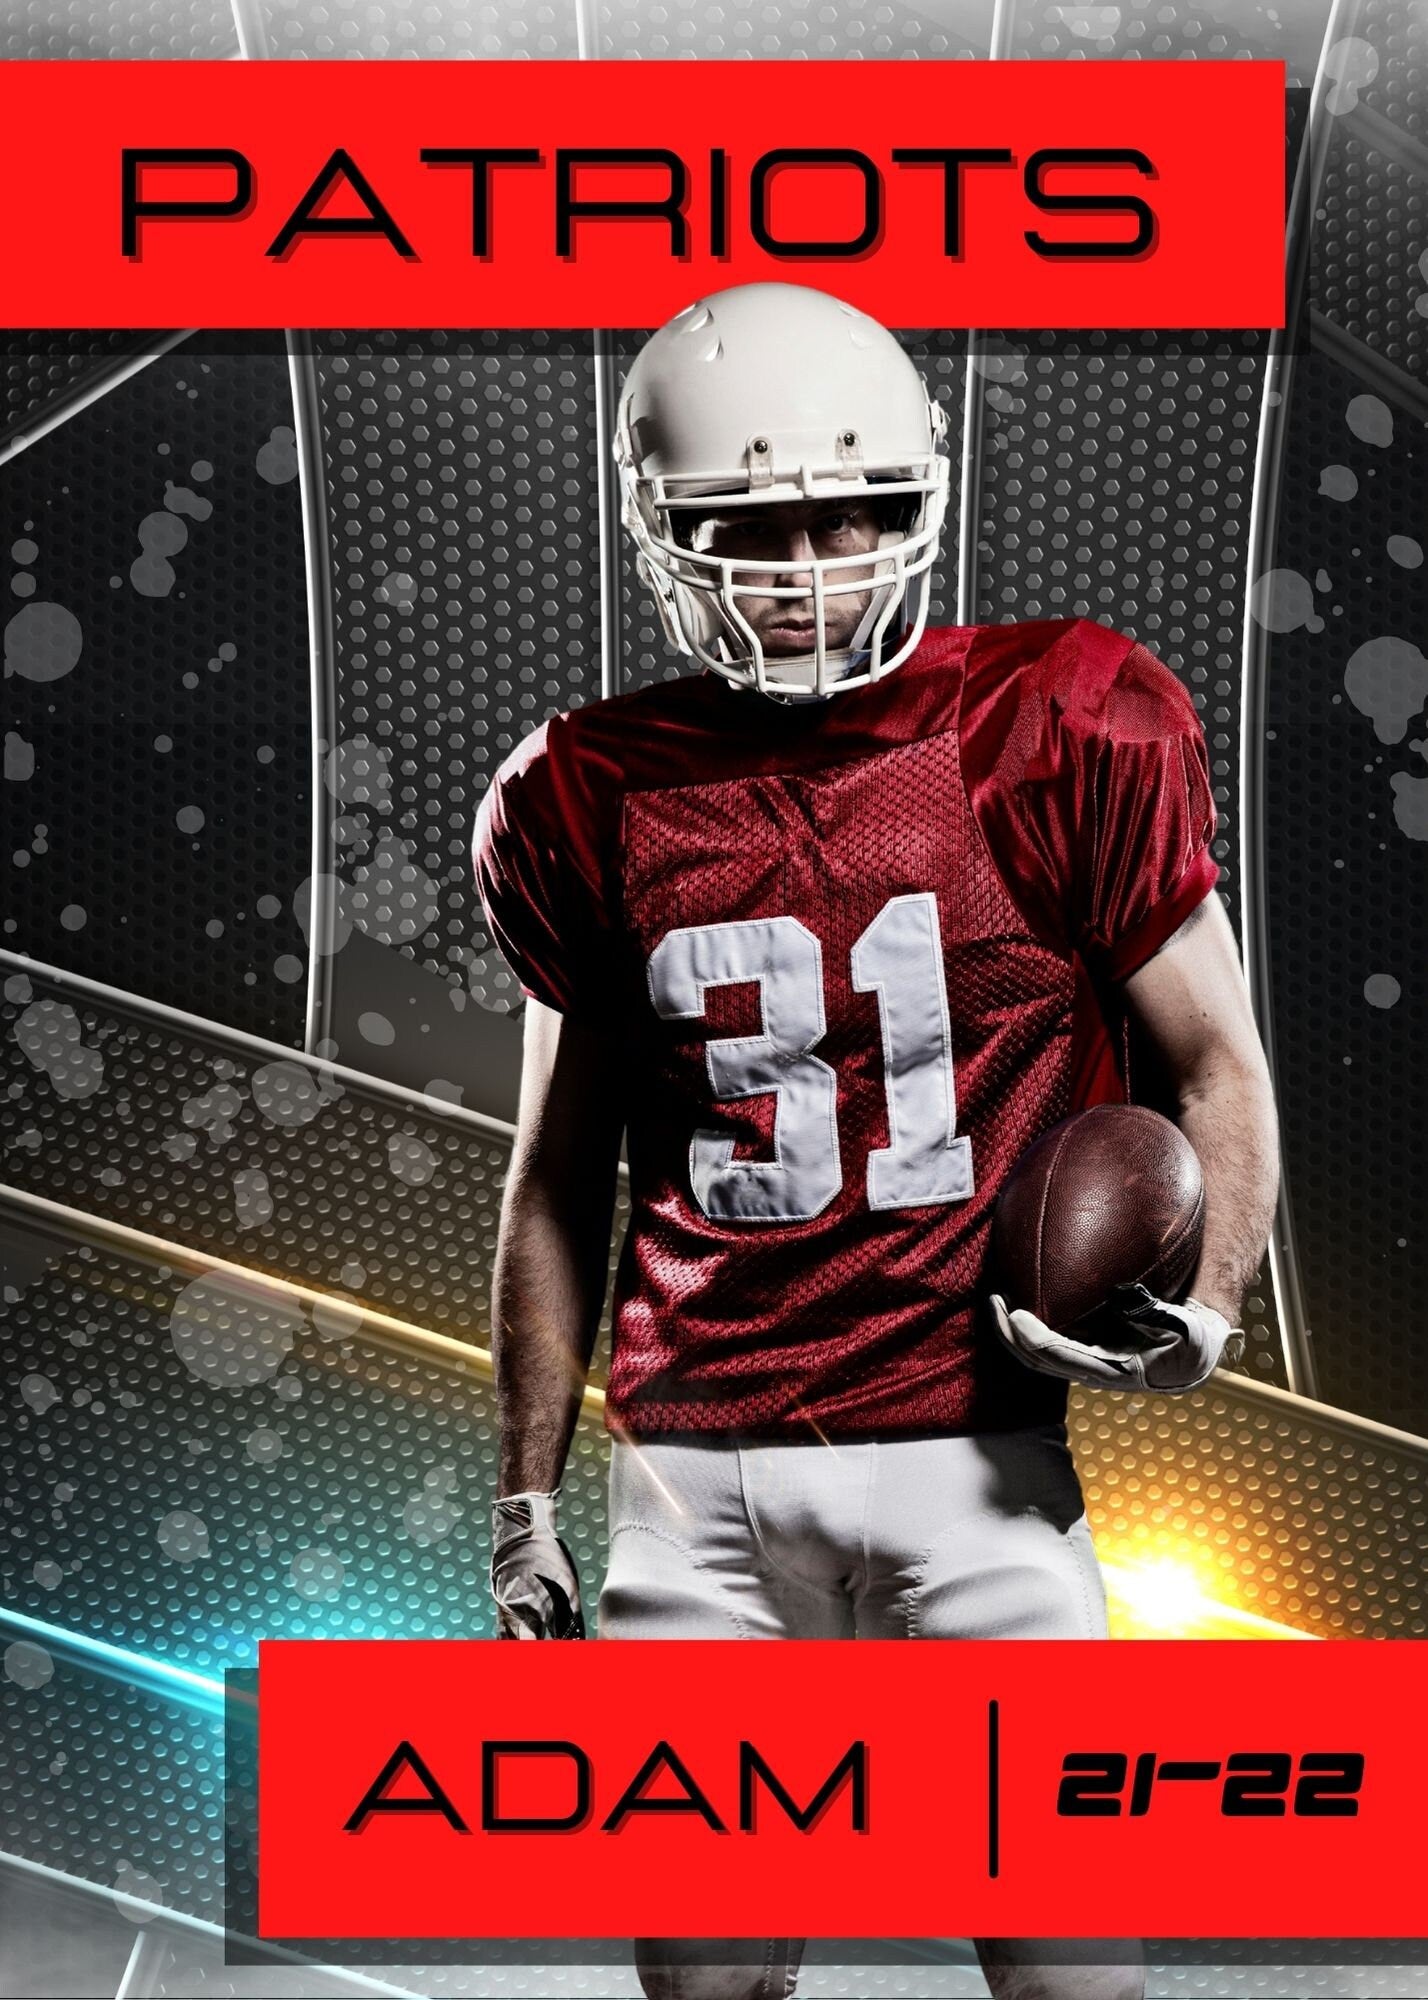 Sports Team Photo Template | Sports Trading Card | Canva Template| Editable Photo Template | Metallic Sports Photo